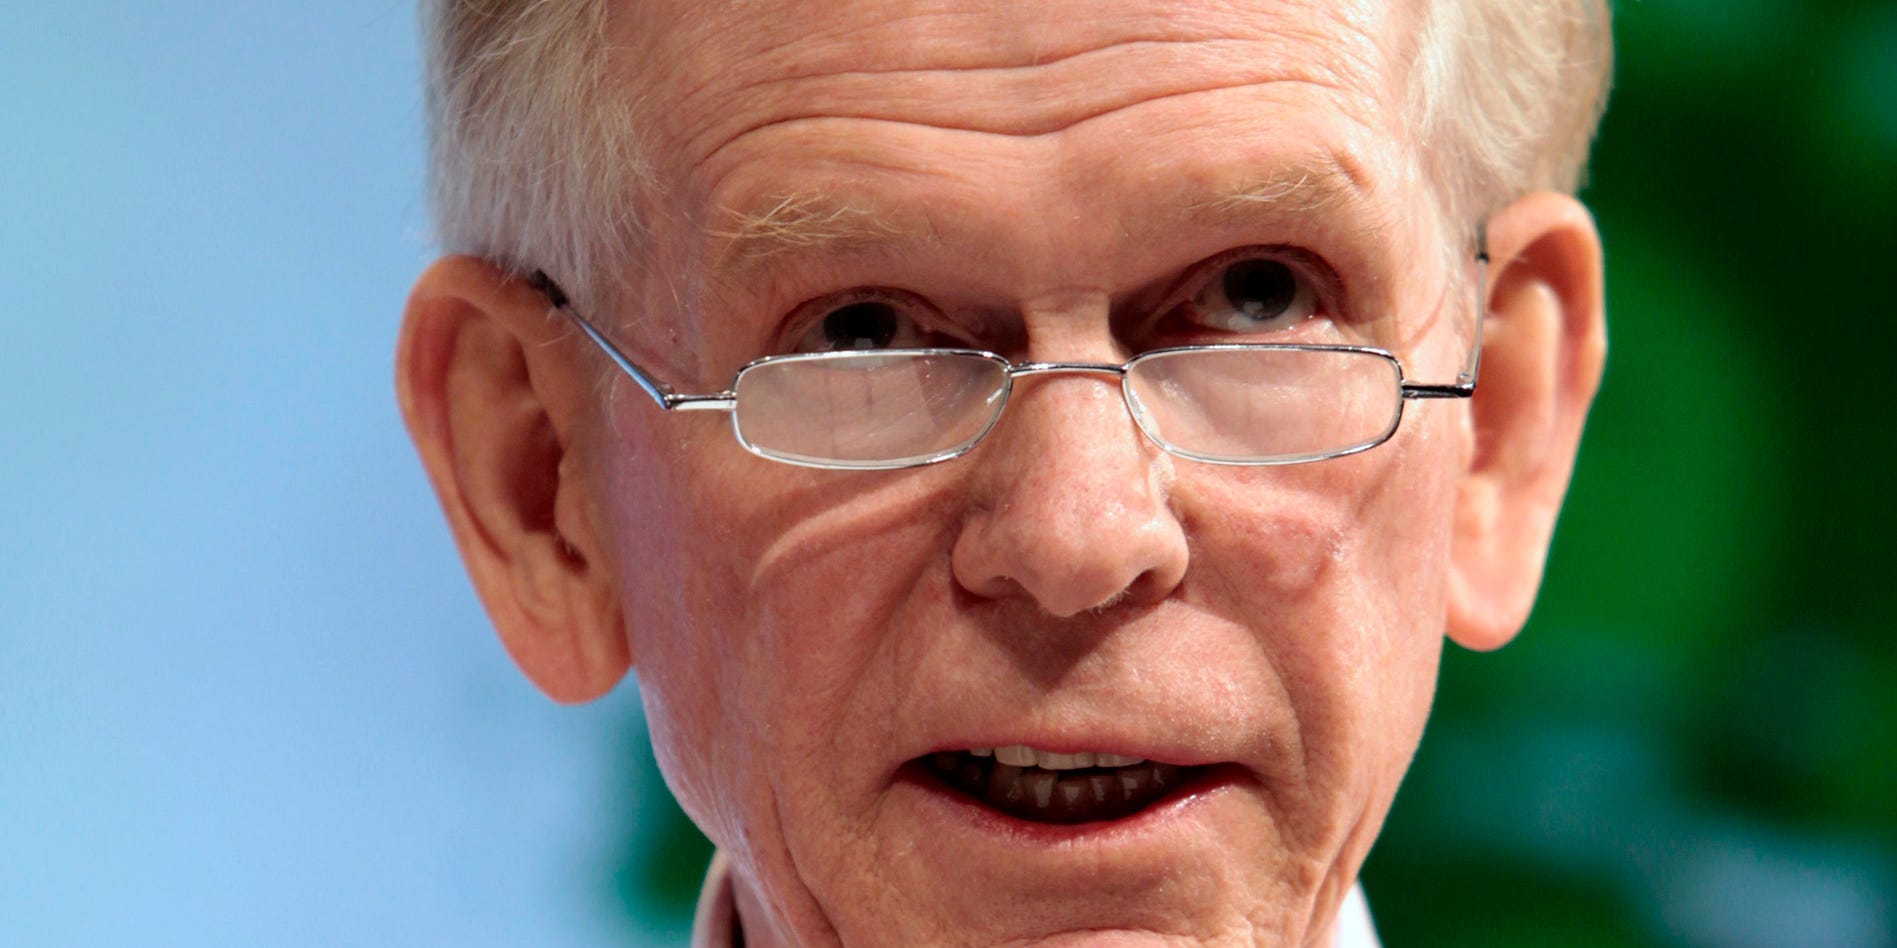 Market historian Jeremy Grantham just warned of a 'superbubble' and predicted an epic crash. Here are the 4 key takeaways from his latest research note.